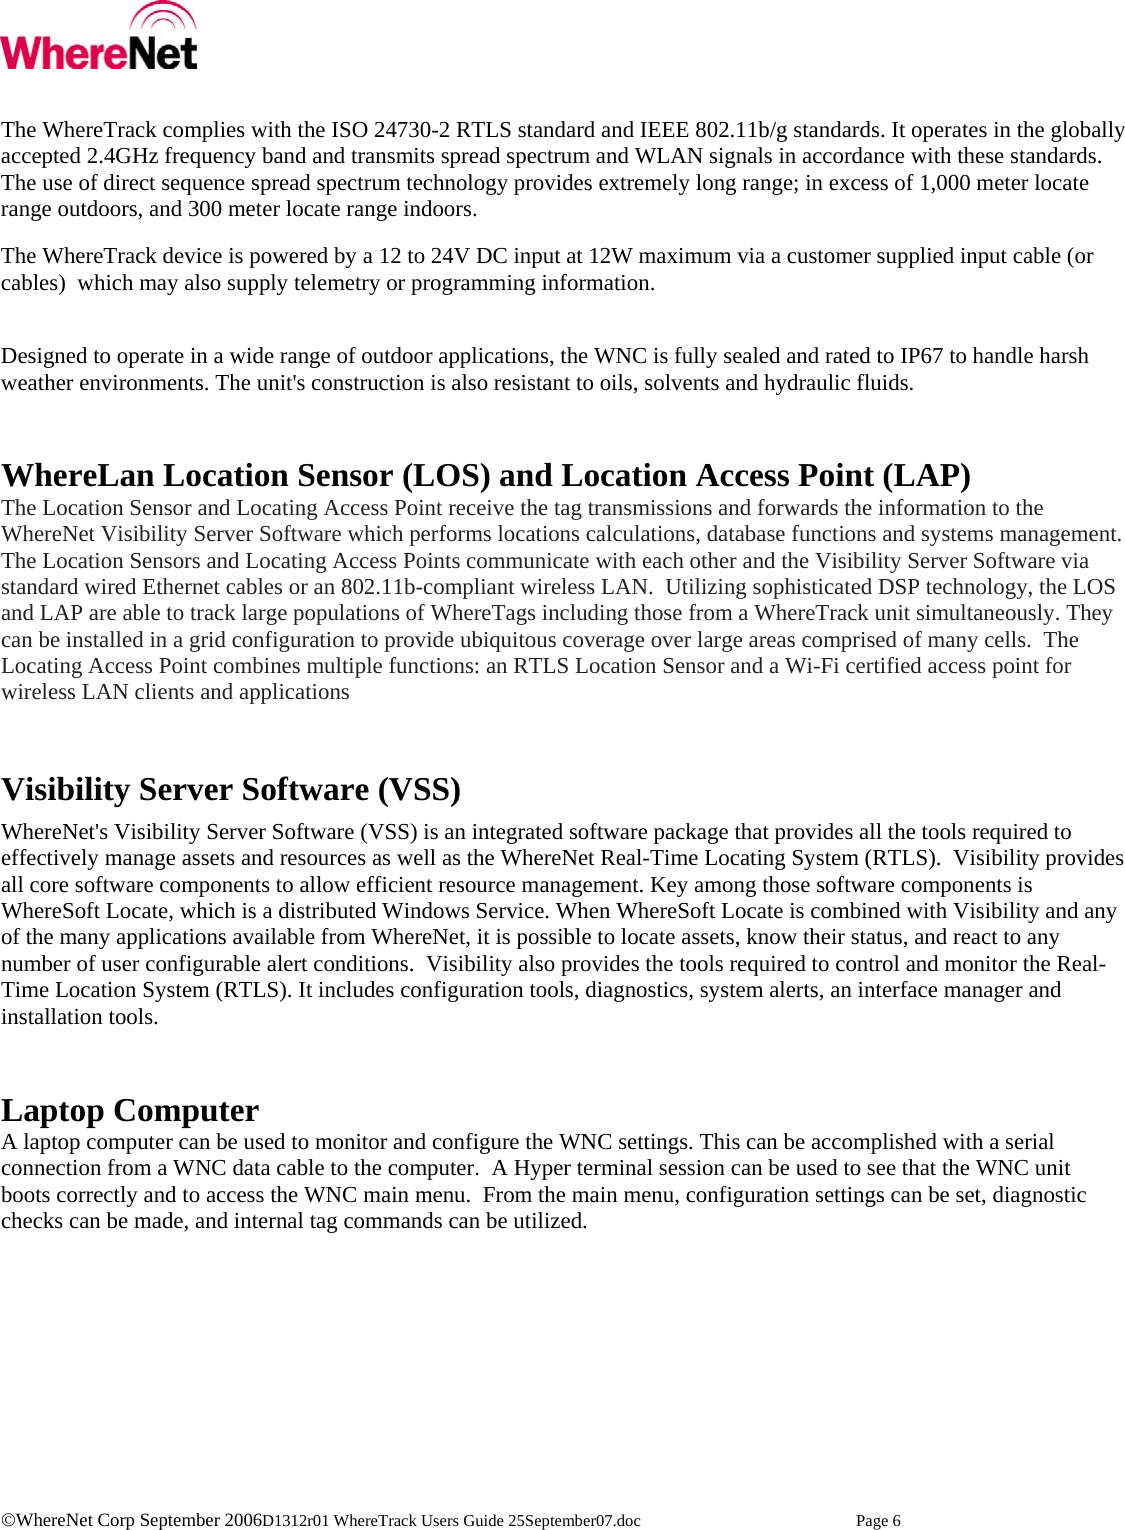    ©WhereNet Corp September 2006D1312r01 WhereTrack Users Guide 25September07.doc  Page 6  The WhereTrack complies with the ISO 24730-2 RTLS standard and IEEE 802.11b/g standards. It operates in the globally accepted 2.4GHz frequency band and transmits spread spectrum and WLAN signals in accordance with these standards. The use of direct sequence spread spectrum technology provides extremely long range; in excess of 1,000 meter locate range outdoors, and 300 meter locate range indoors.  The WhereTrack device is powered by a 12 to 24V DC input at 12W maximum via a customer supplied input cable (or cables)  which may also supply telemetry or programming information.  Designed to operate in a wide range of outdoor applications, the WNC is fully sealed and rated to IP67 to handle harsh weather environments. The unit&apos;s construction is also resistant to oils, solvents and hydraulic fluids.   WhereLan Location Sensor (LOS) and Location Access Point (LAP) The Location Sensor and Locating Access Point receive the tag transmissions and forwards the information to the WhereNet Visibility Server Software which performs locations calculations, database functions and systems management. The Location Sensors and Locating Access Points communicate with each other and the Visibility Server Software via standard wired Ethernet cables or an 802.11b-compliant wireless LAN.  Utilizing sophisticated DSP technology, the LOS and LAP are able to track large populations of WhereTags including those from a WhereTrack unit simultaneously. They can be installed in a grid configuration to provide ubiquitous coverage over large areas comprised of many cells.  The Locating Access Point combines multiple functions: an RTLS Location Sensor and a Wi-Fi certified access point for wireless LAN clients and applications   Visibility Server Software (VSS) WhereNet&apos;s Visibility Server Software (VSS) is an integrated software package that provides all the tools required to effectively manage assets and resources as well as the WhereNet Real-Time Locating System (RTLS).  Visibility provides all core software components to allow efficient resource management. Key among those software components is WhereSoft Locate, which is a distributed Windows Service. When WhereSoft Locate is combined with Visibility and any of the many applications available from WhereNet, it is possible to locate assets, know their status, and react to any number of user configurable alert conditions.  Visibility also provides the tools required to control and monitor the Real-Time Location System (RTLS). It includes configuration tools, diagnostics, system alerts, an interface manager and installation tools.    Laptop Computer A laptop computer can be used to monitor and configure the WNC settings. This can be accomplished with a serial connection from a WNC data cable to the computer.  A Hyper terminal session can be used to see that the WNC unit boots correctly and to access the WNC main menu.  From the main menu, configuration settings can be set, diagnostic checks can be made, and internal tag commands can be utilized.   